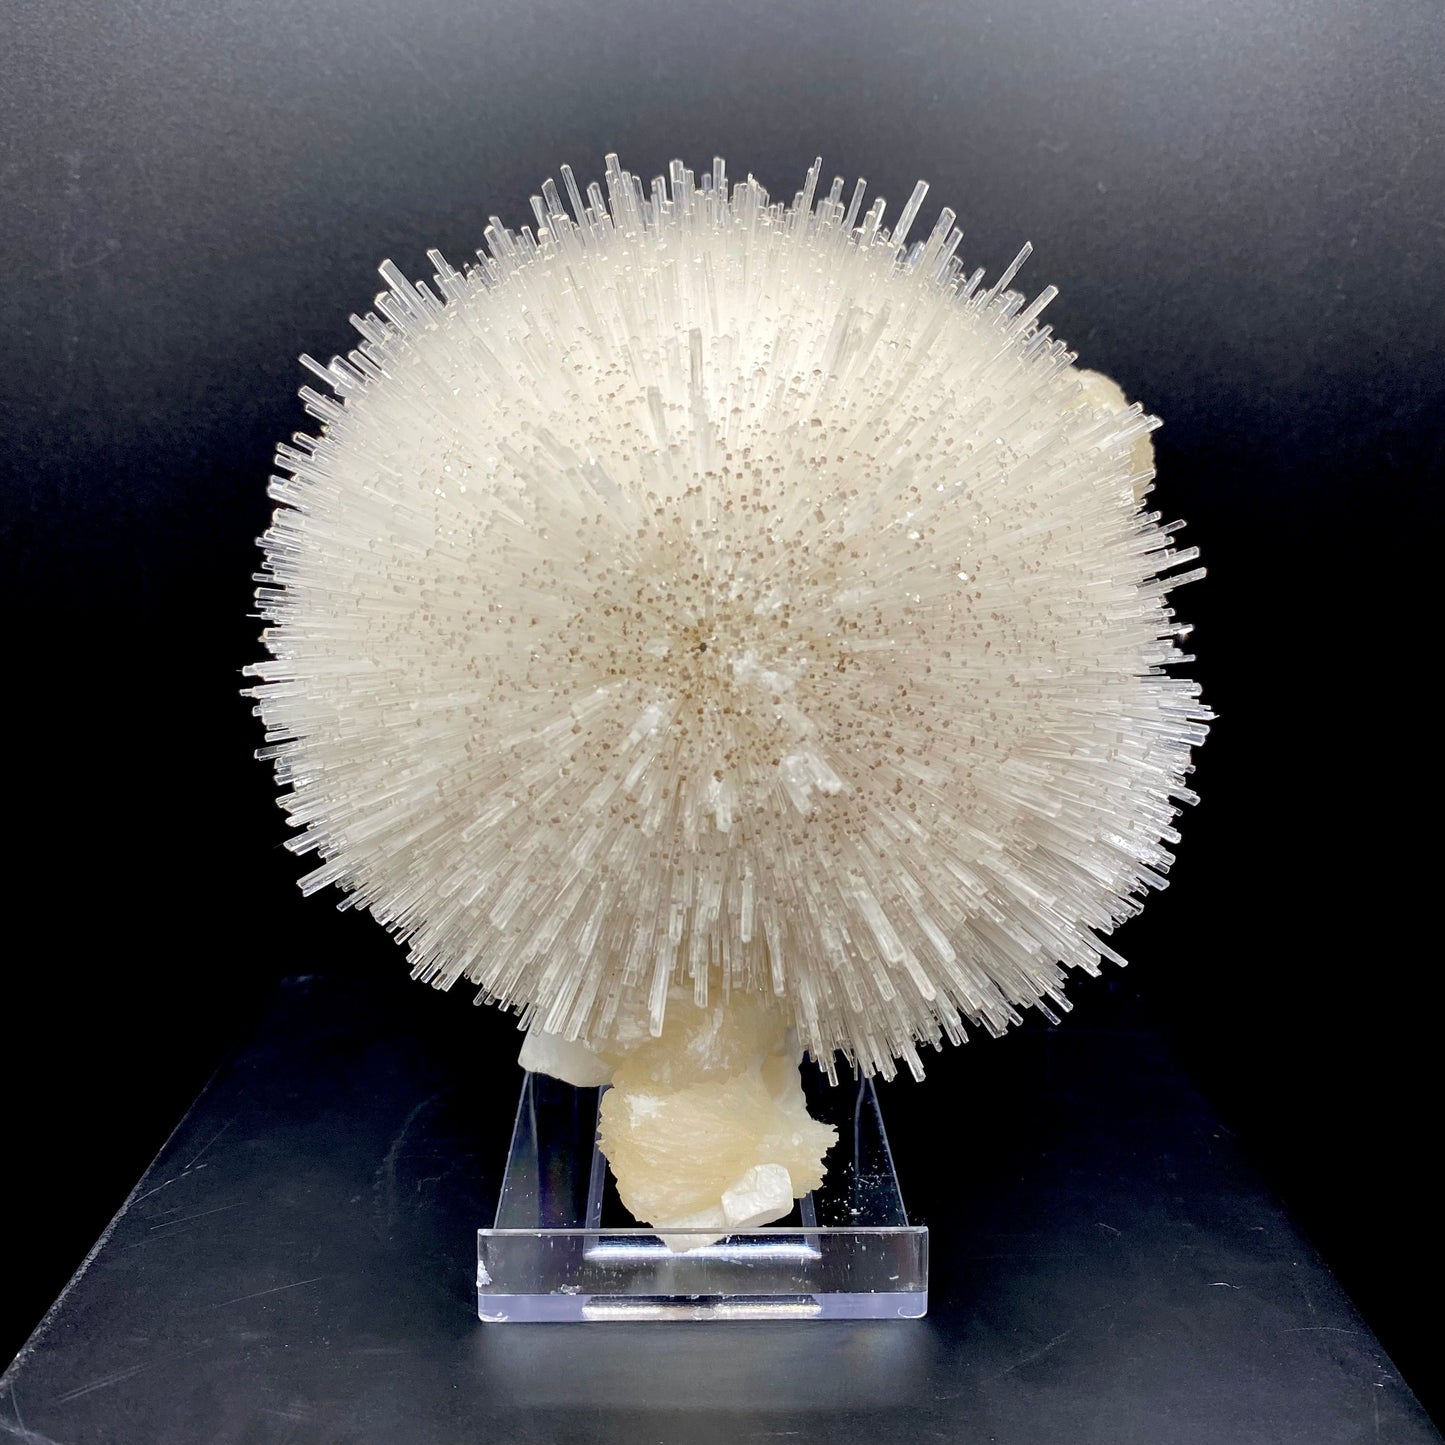 An impressive and gorgeous hemispherical porcupine quill spray composed of glassy mesolite needles with calcite tips, resembling a delicate white cotton ball, is elegantly displayed on a stand. Its visual impact is truly breathtaking. Stilbite composes the base.